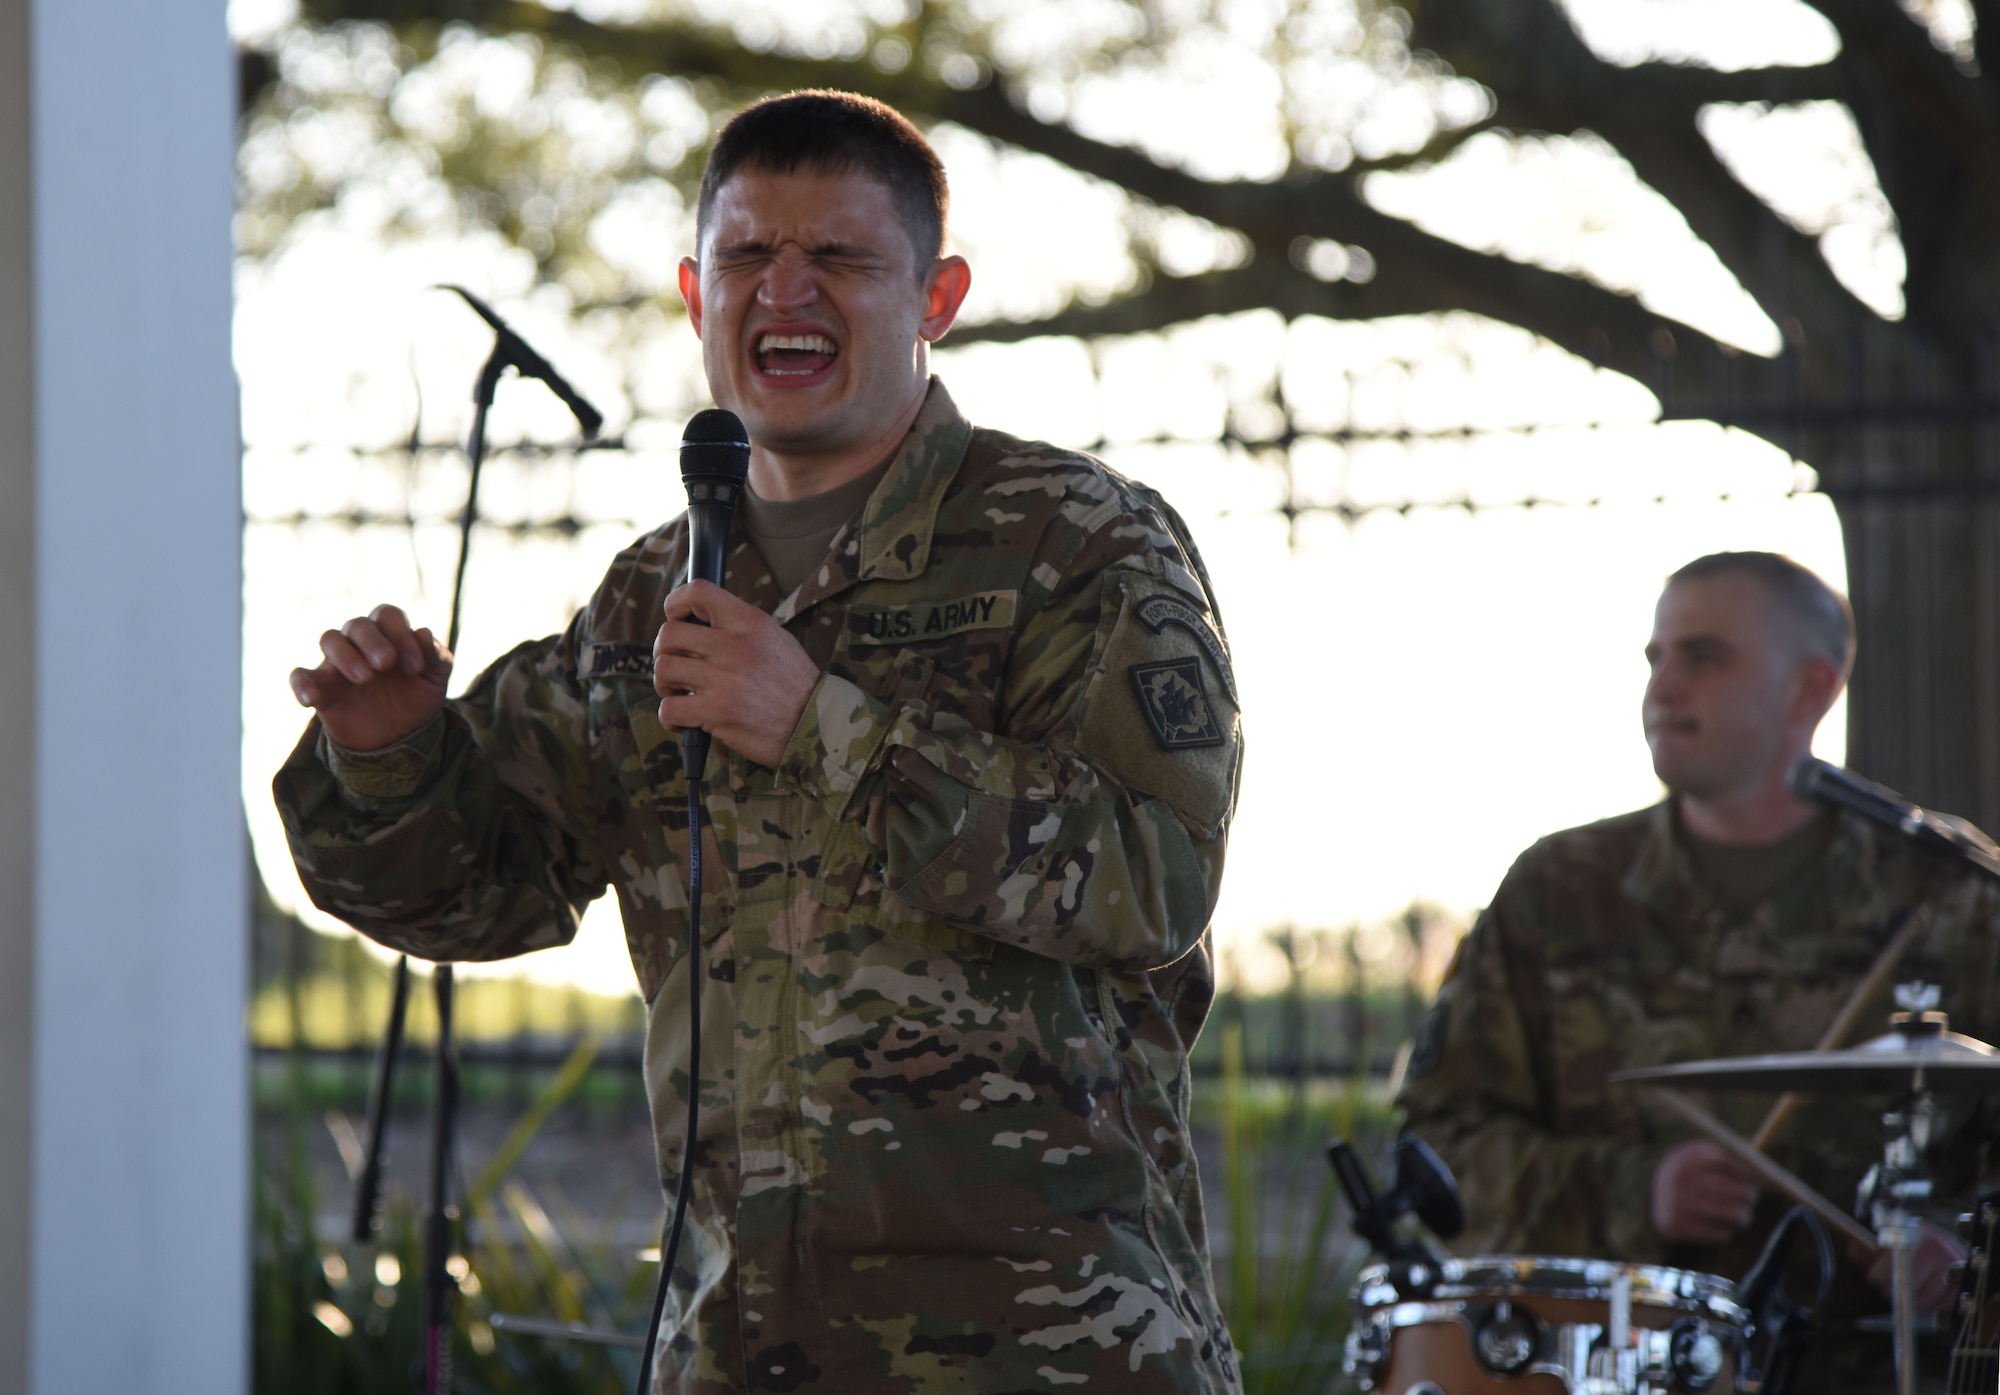 U.S. Army Sergeant Brandon Tingstrom, U.S. Army 41st Army Band vocalist and musical ambassador, Mississippi Air National Guard, Jackson, Mississippi, performs at the Biloxi Lighthouse Park Pavilion March 13, 2018, in Biloxi, Mississippi. The band has been providing musical support and entertainment for over 50 years. They also performed at the White House Hotel, in Biloxi, Mississippi, and at the Vandenberg Commons on Keesler Air Force Base, Mississippi. (U.S. Air Force photo by Kemberly Groue)